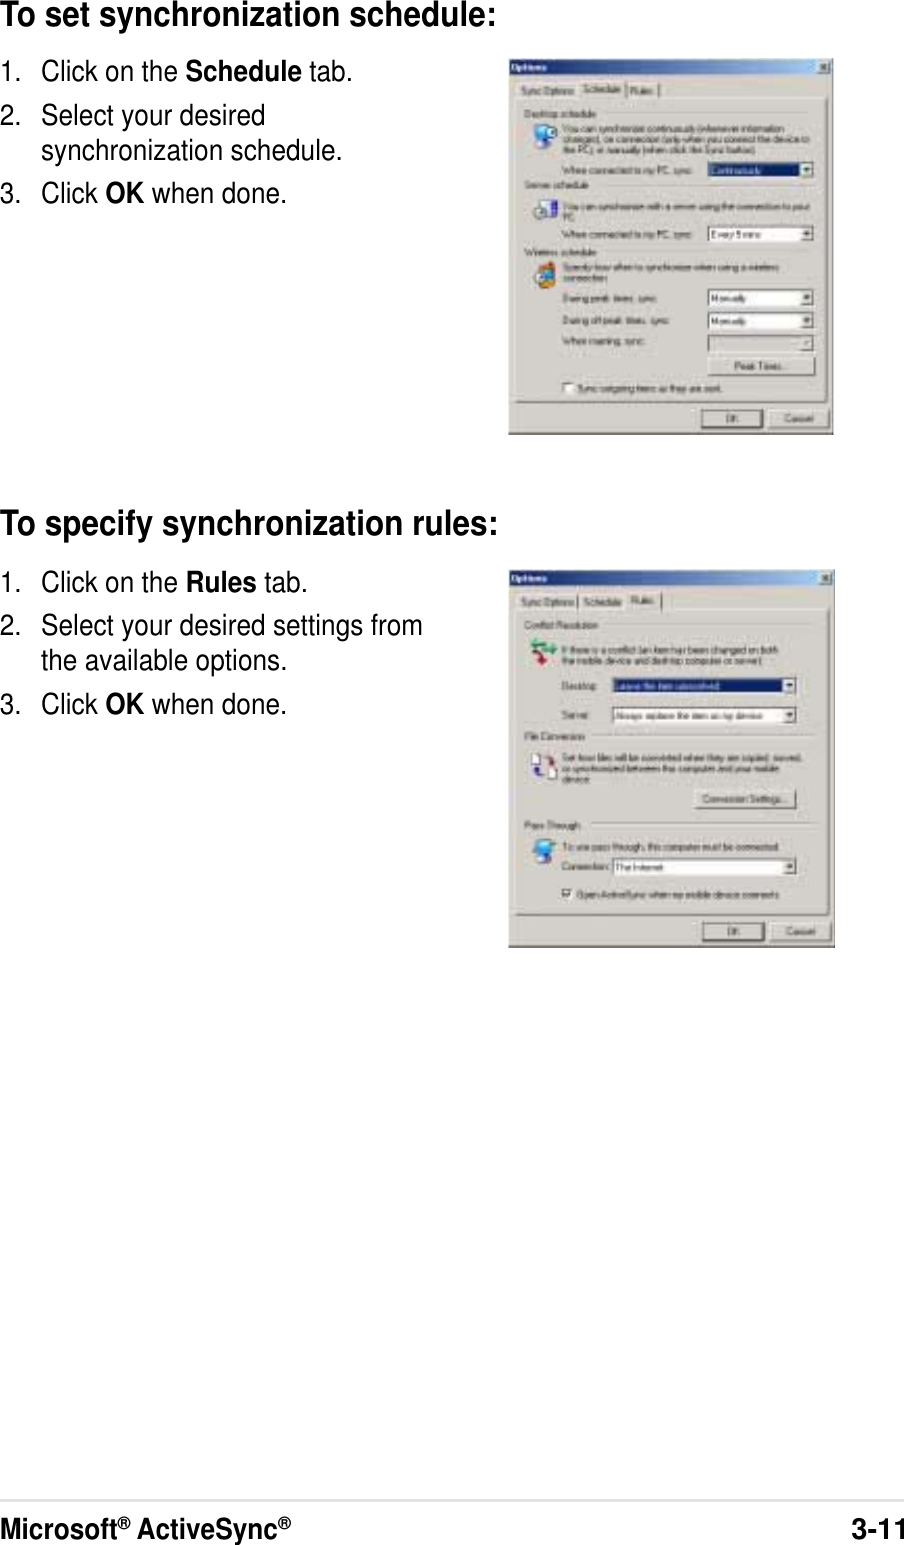 Microsoft® ActiveSync®3-11To set synchronization schedule:1. Click on the Schedule tab.2. Select your desiredsynchronization schedule.3. Click OK when done.To specify synchronization rules:1. Click on the Rules tab.2. Select your desired settings fromthe available options.3. Click OK when done.